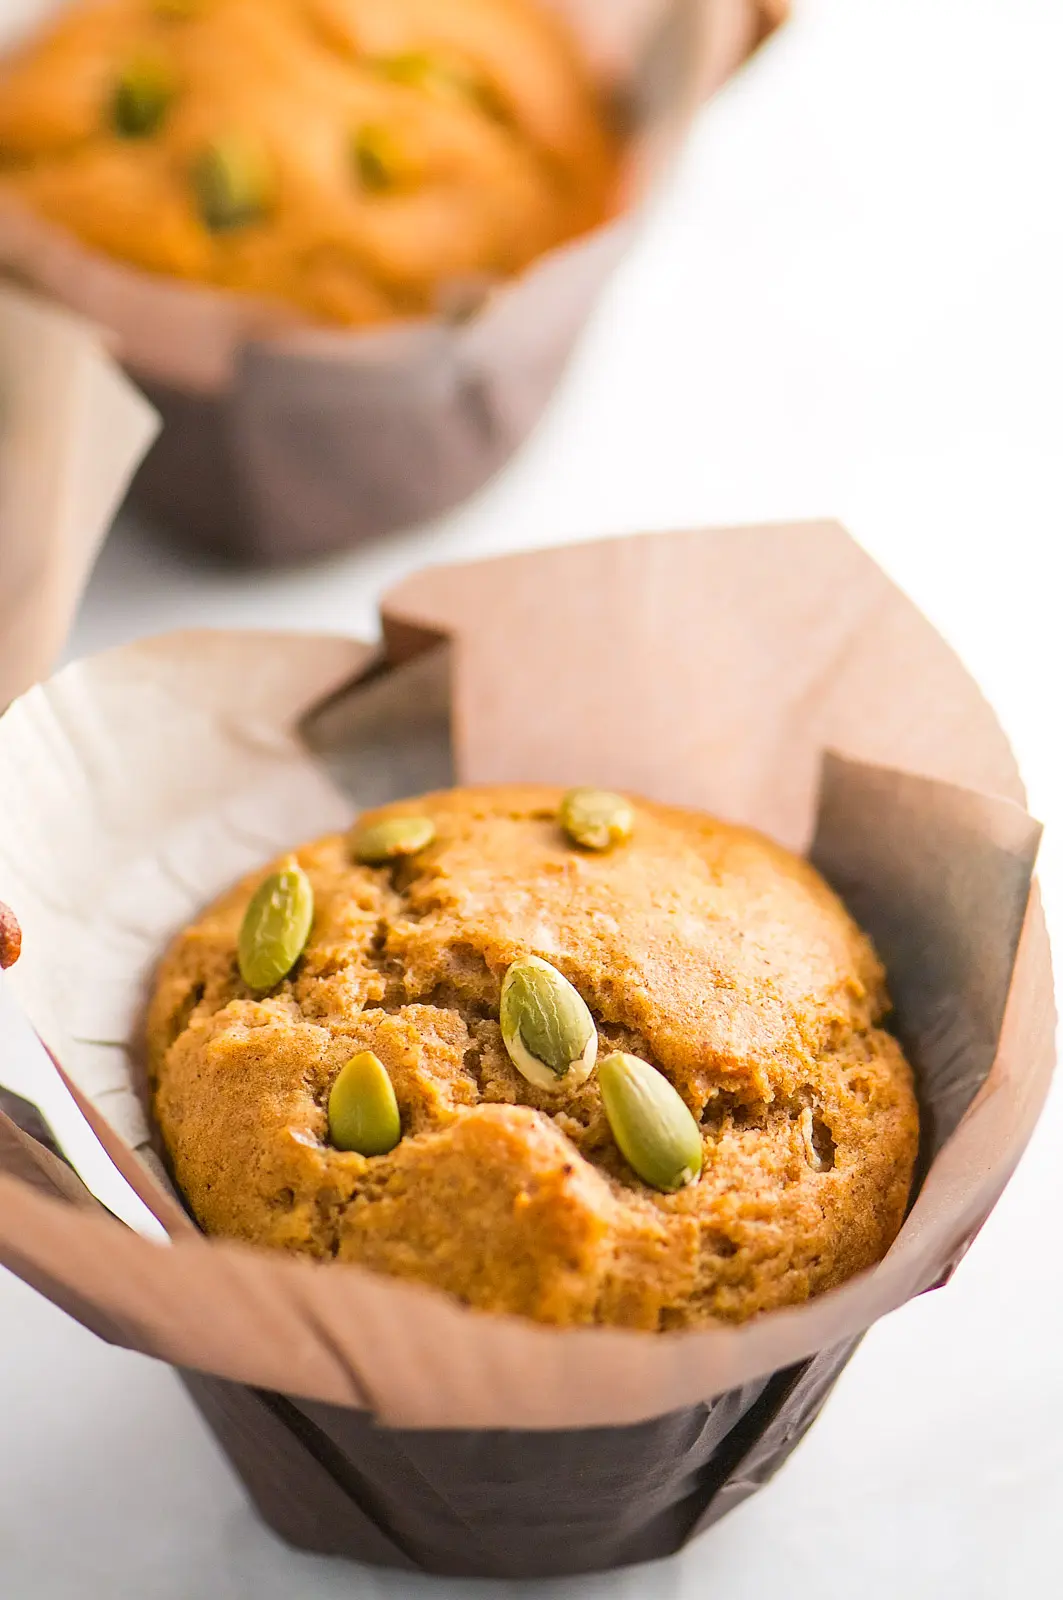 A closeup of a muffin with pumpkin seeds on top. The muffin is in a large brown paper.